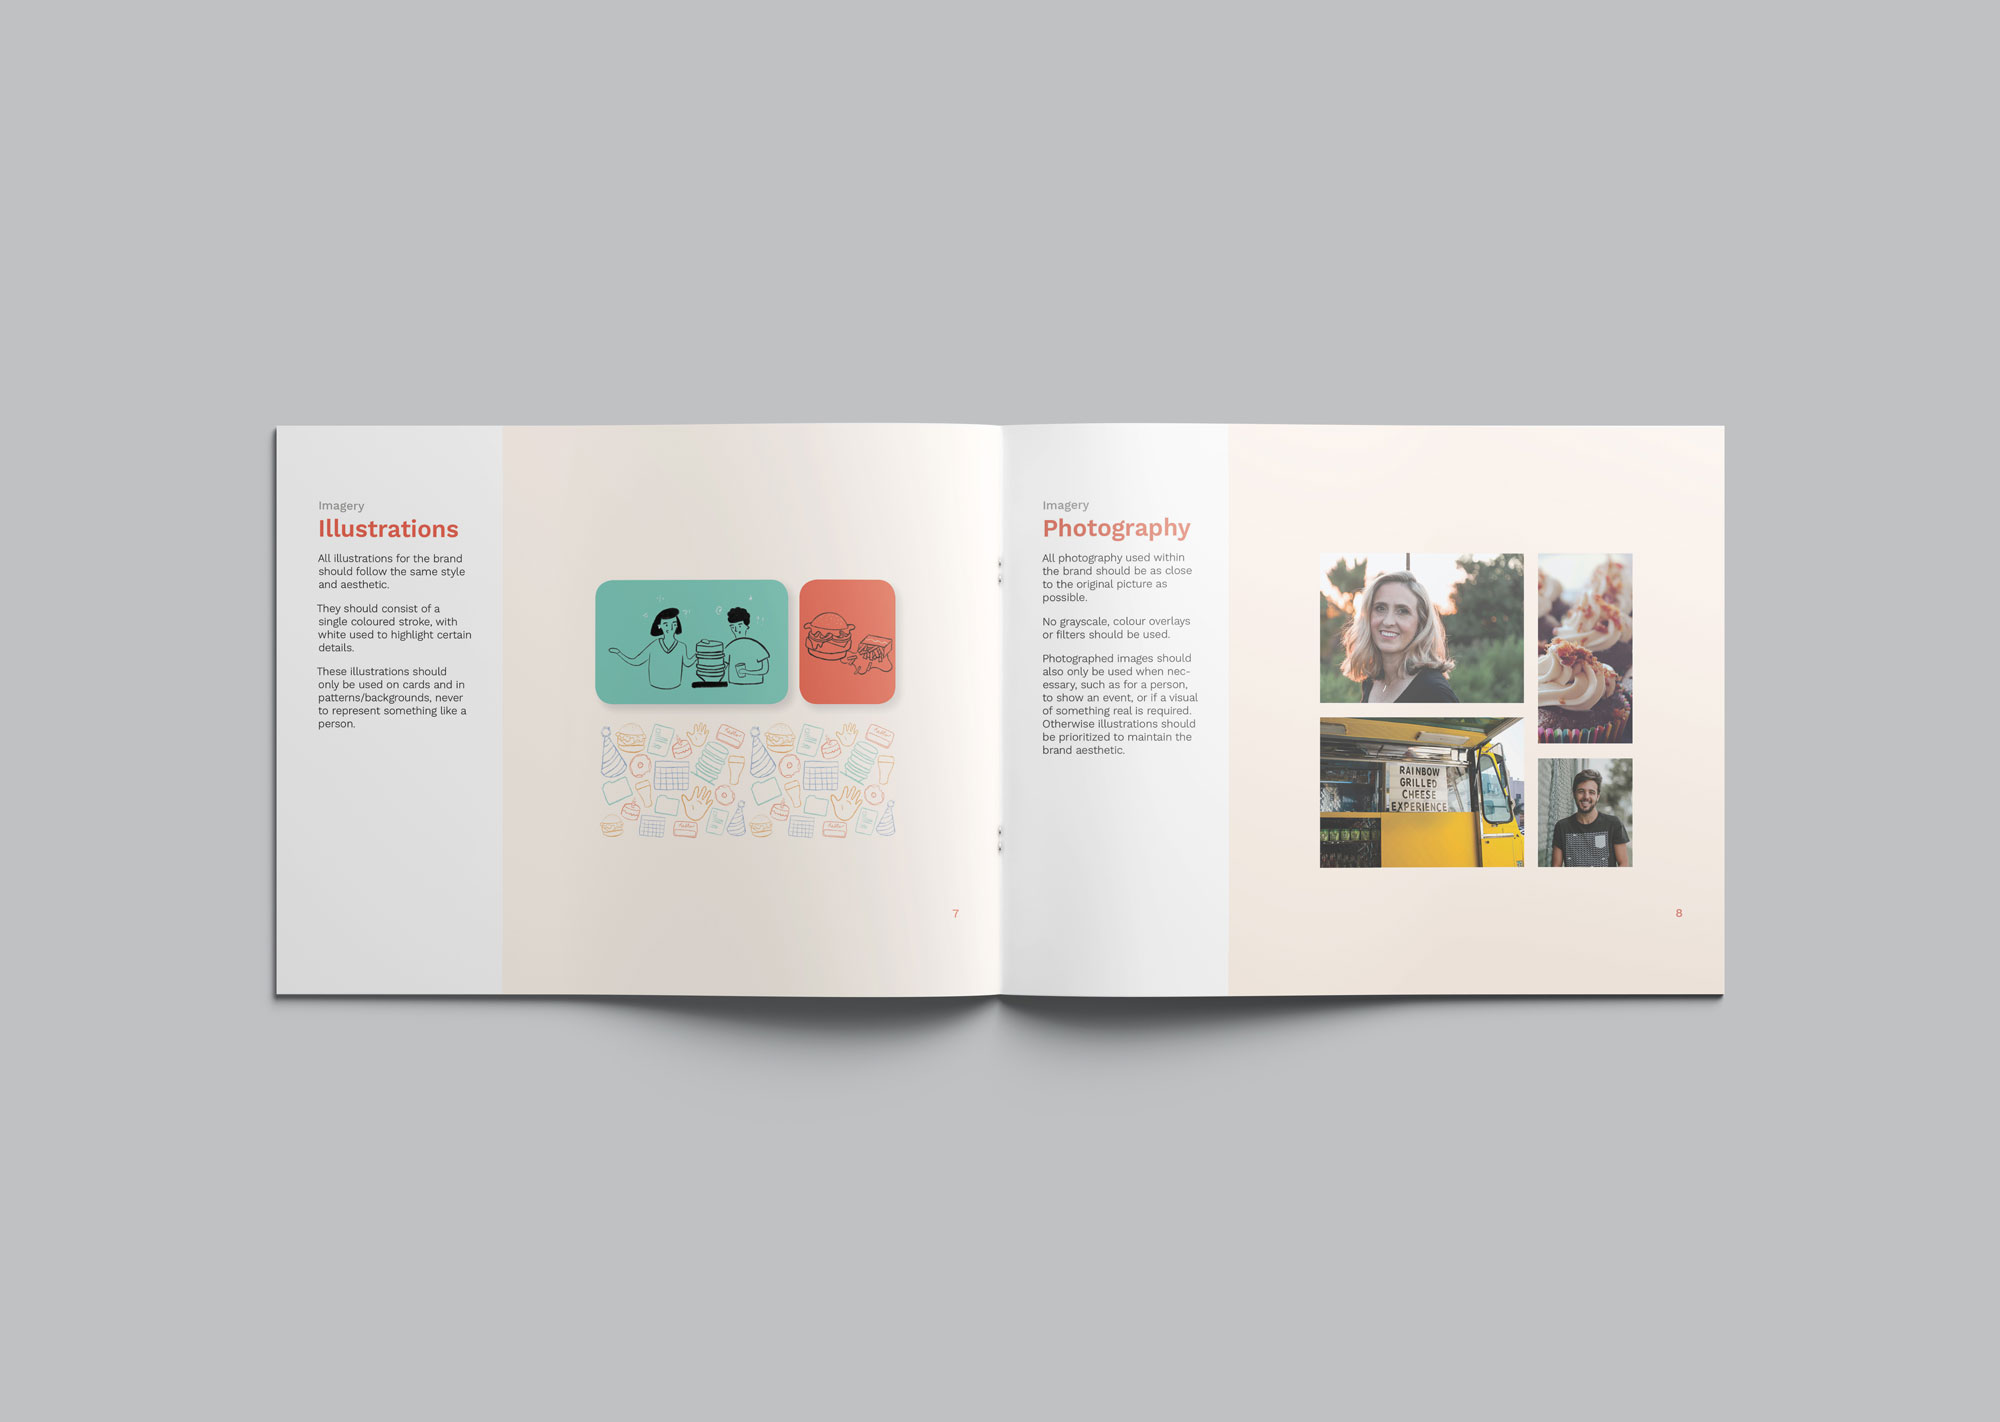 Inside page showing the illustrations and photography of the branding guidelines